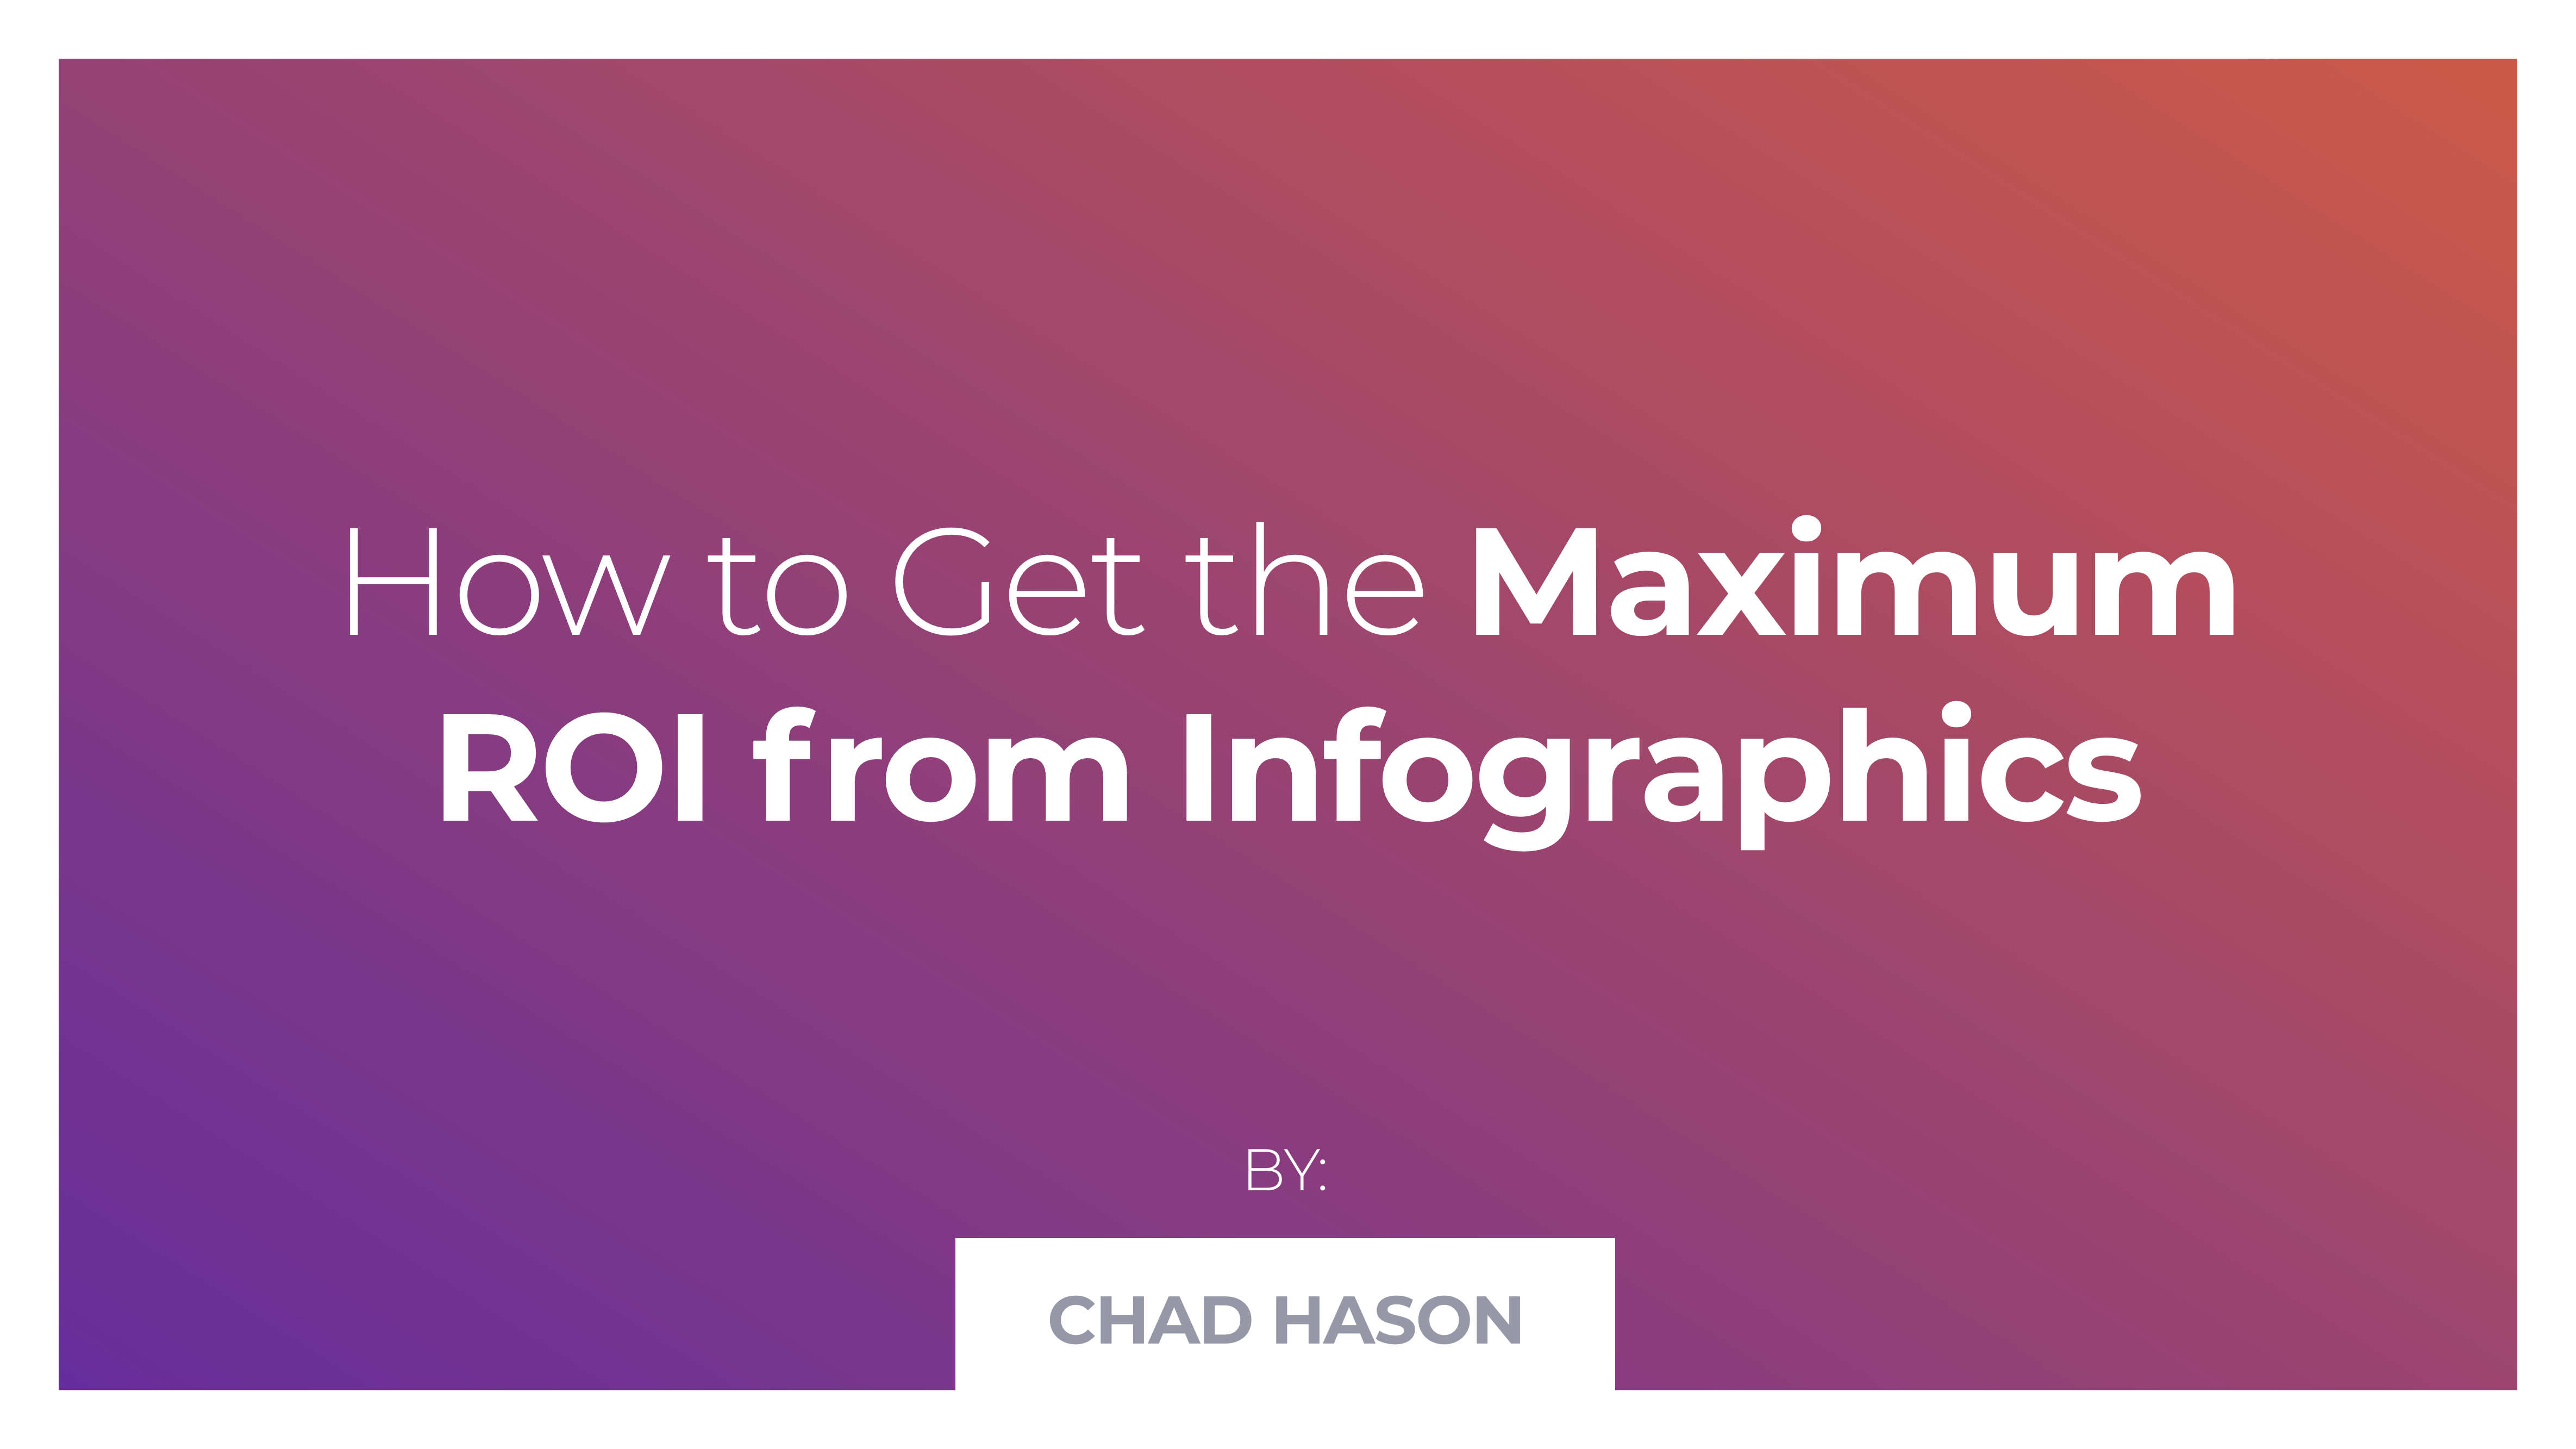 How to Get the Maximum ROI from Infographics